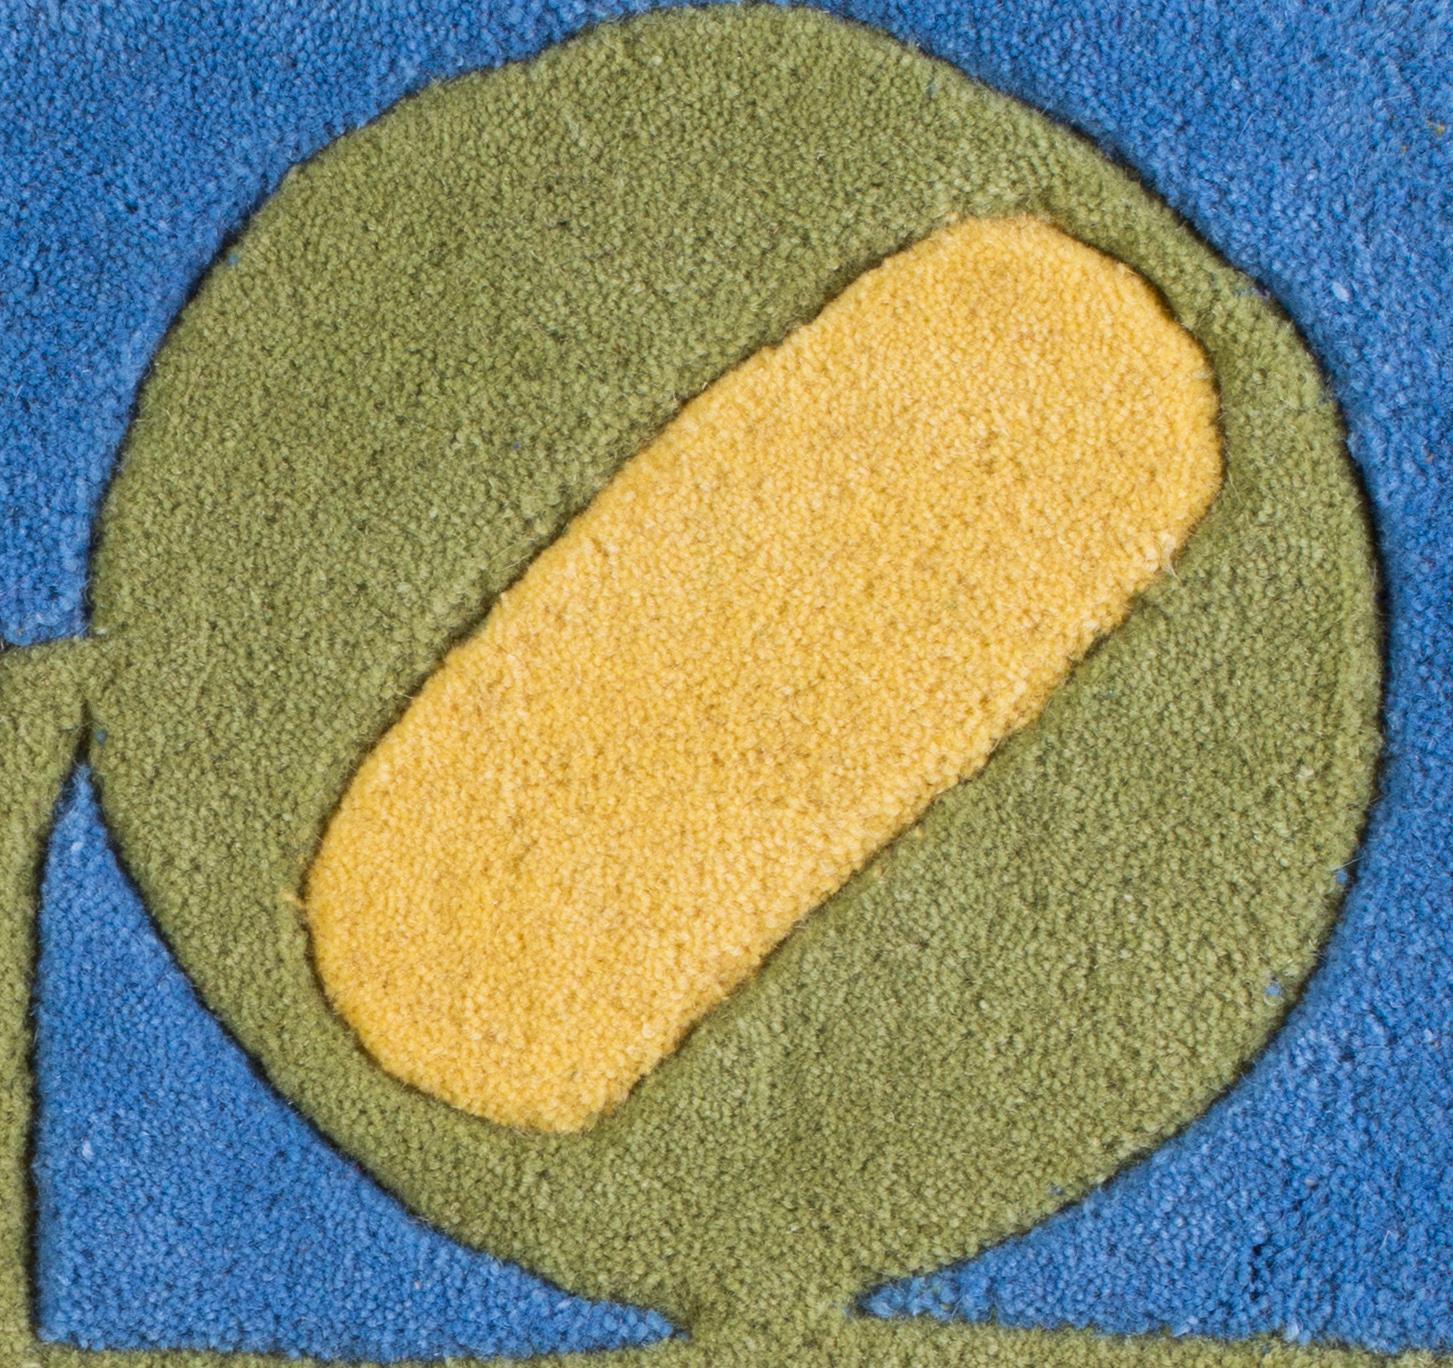 Spring, mixed media 'Love' popart piece in green, yellow and blue by Indiana 1